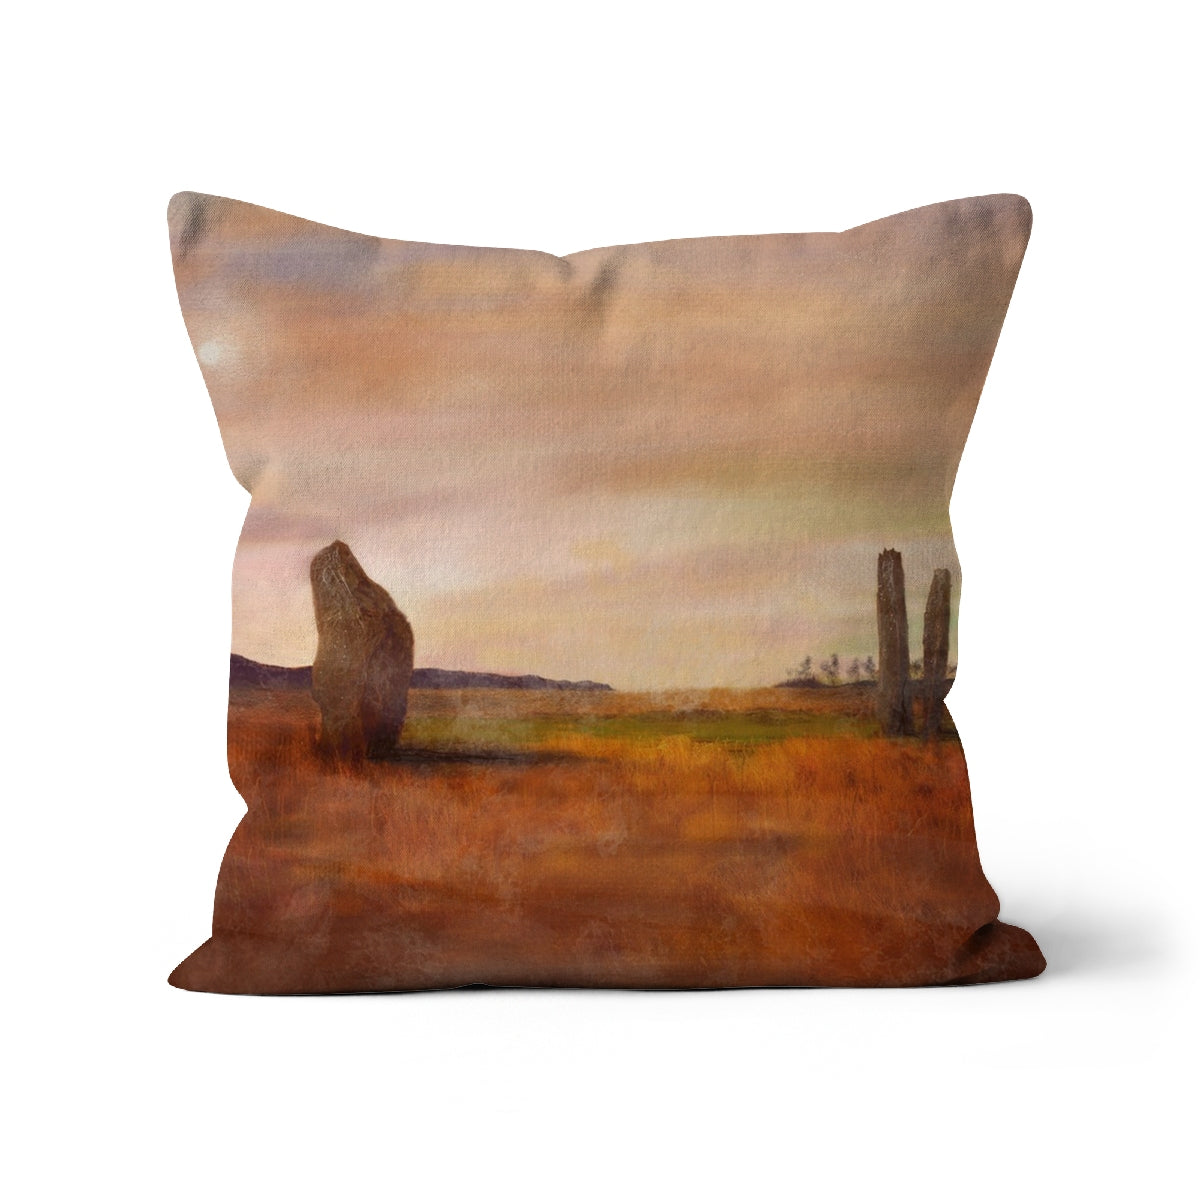 Machrie Moor Arran Art Gifts Cushion-Cushions-Arran Art Gallery-Faux Suede-18"x18"-Paintings, Prints, Homeware, Art Gifts From Scotland By Scottish Artist Kevin Hunter